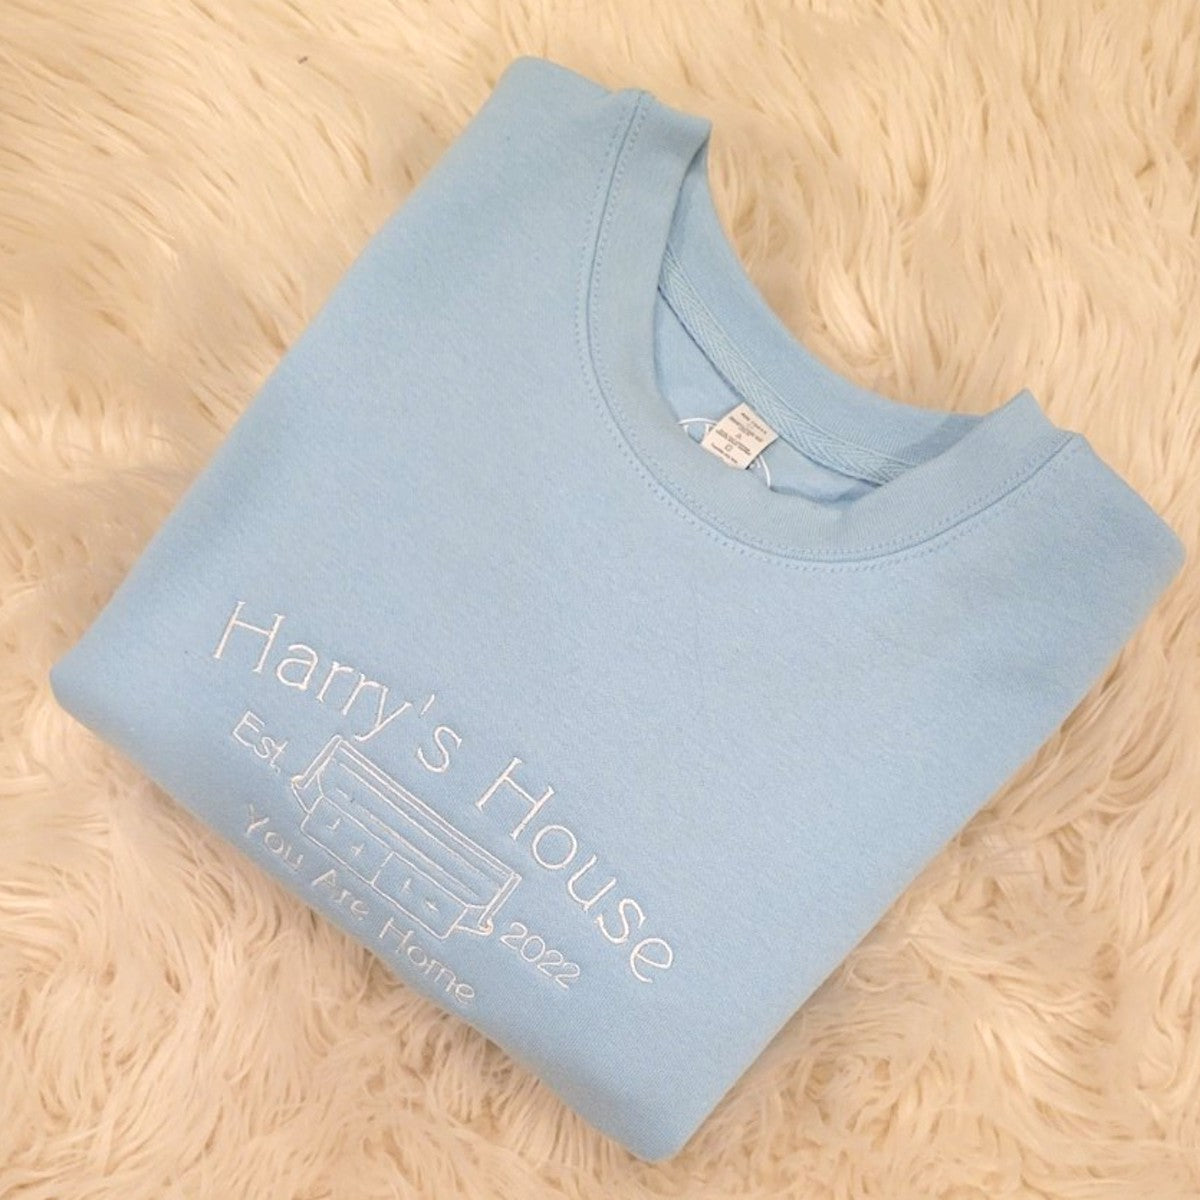 Harrys House Embroidered Crewneck Xs / Sky Blue Sweater